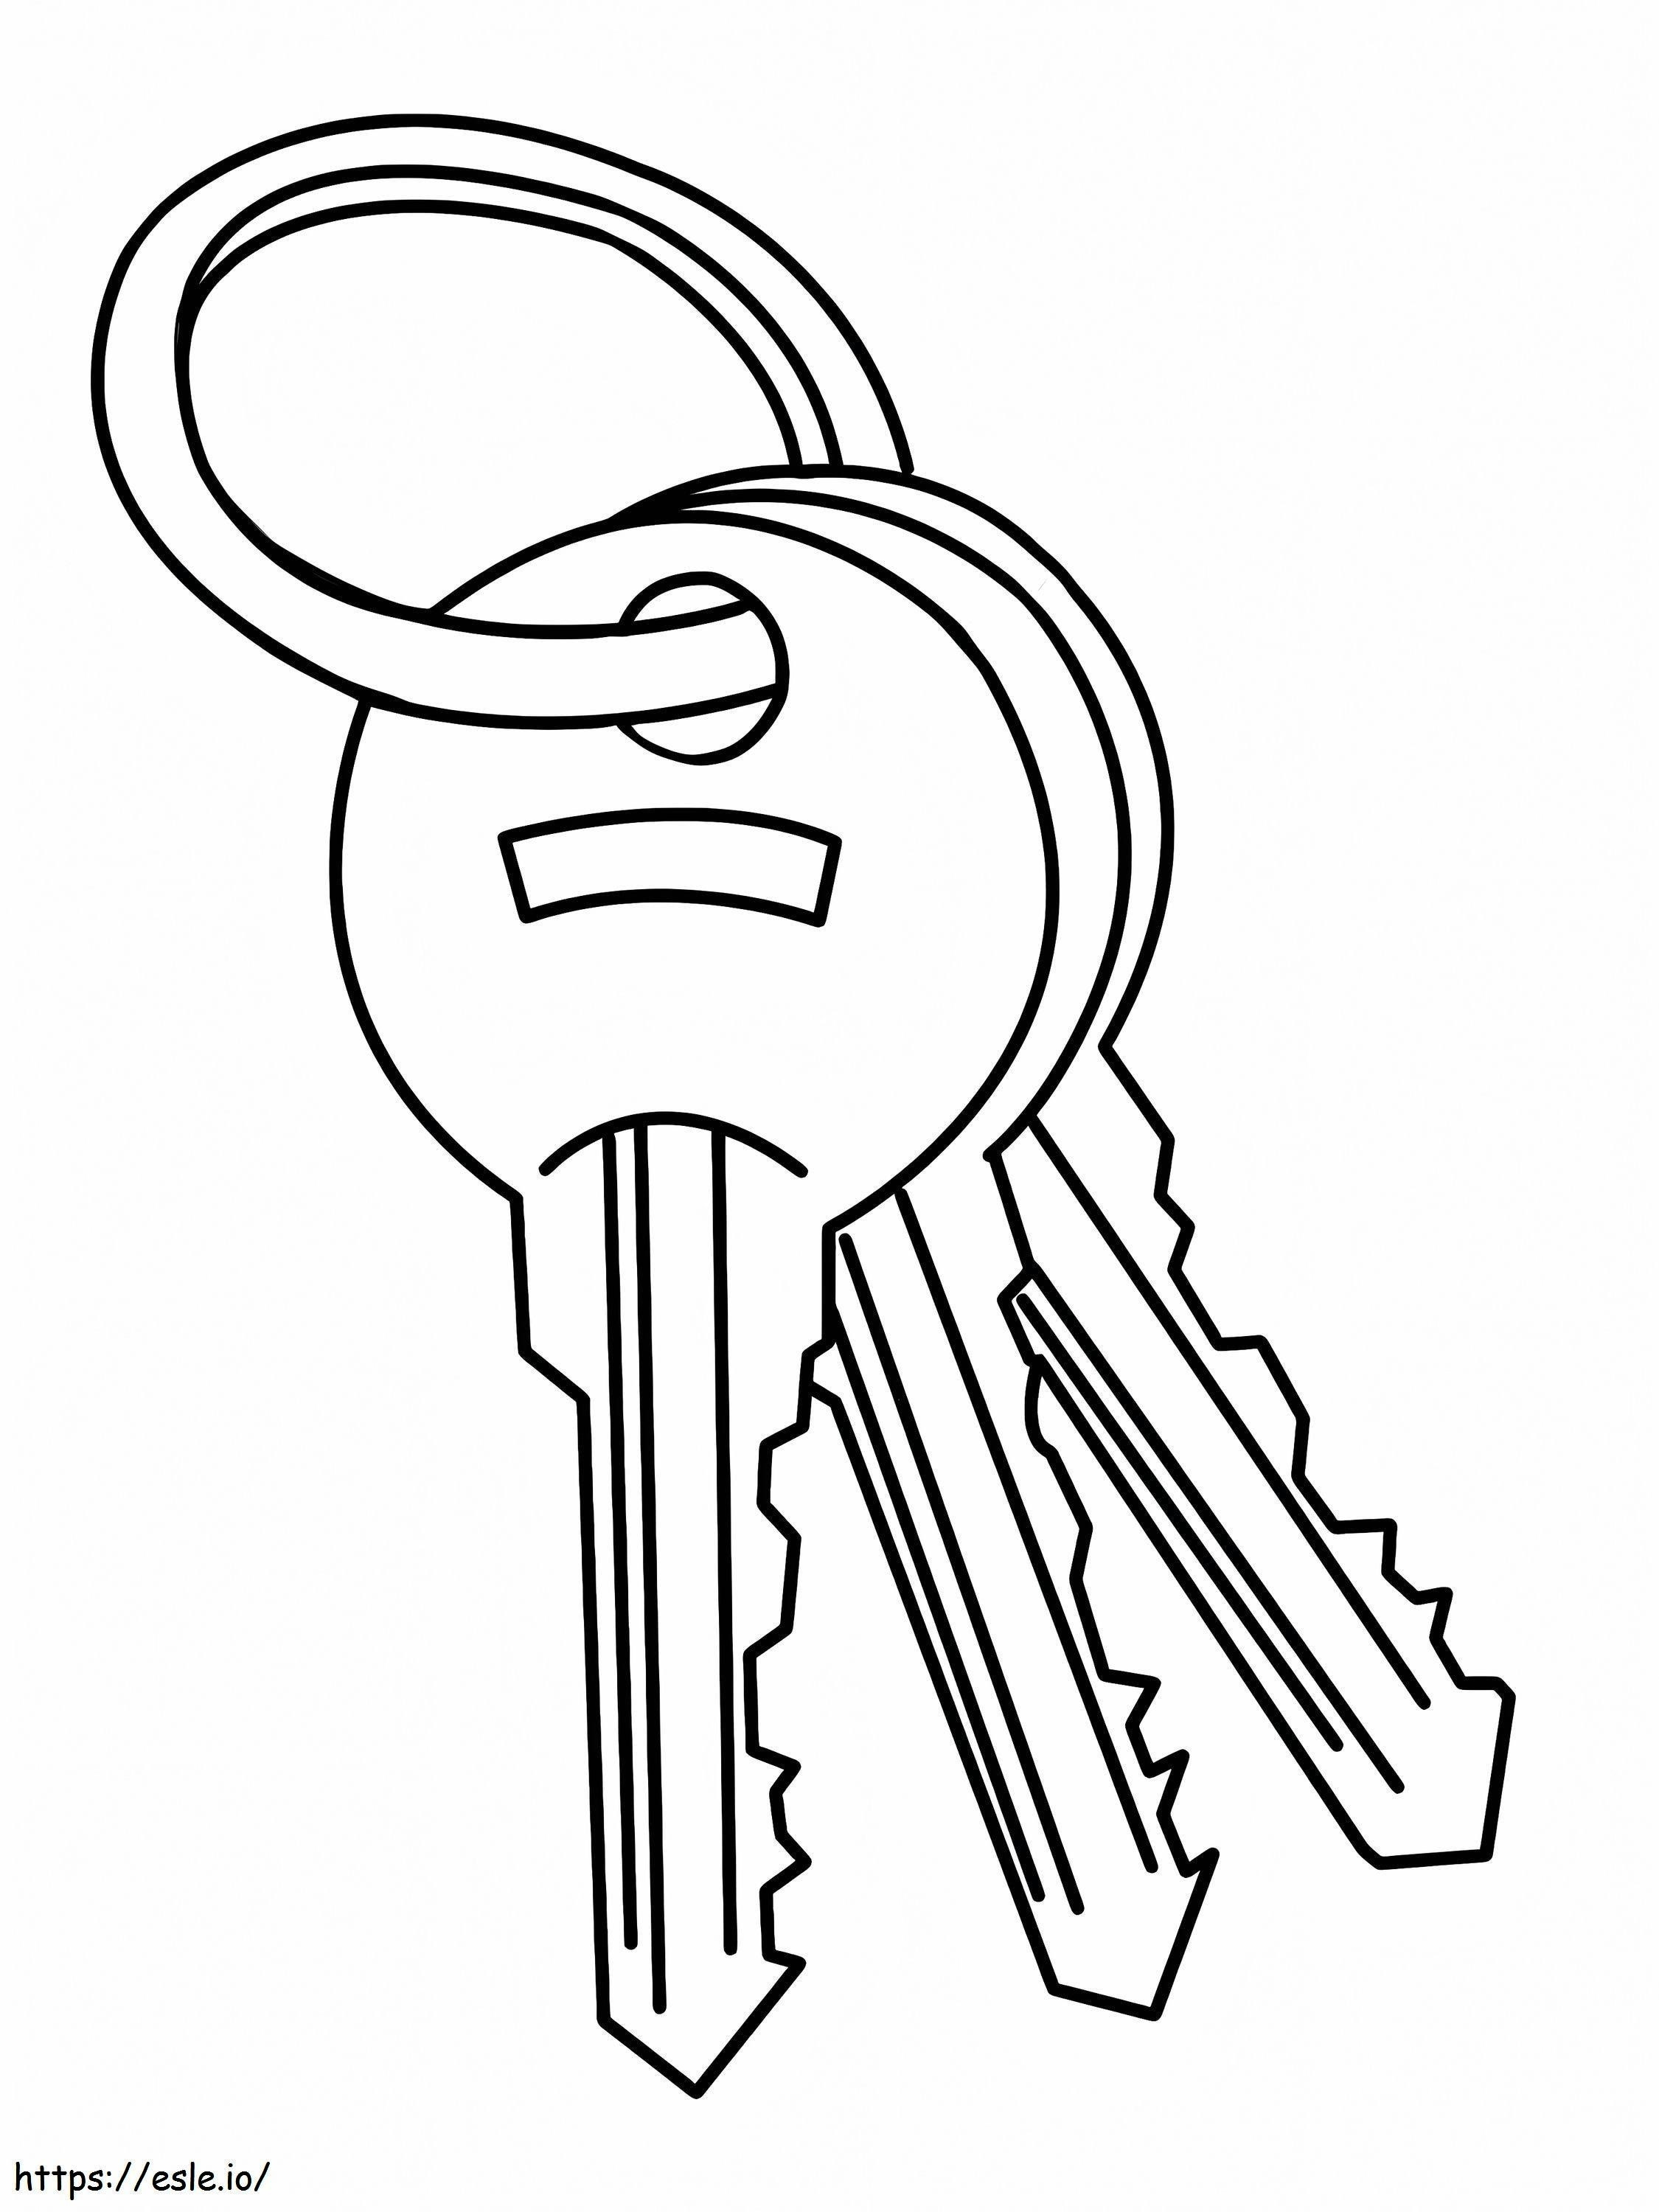 Bunch Of Keys coloring page